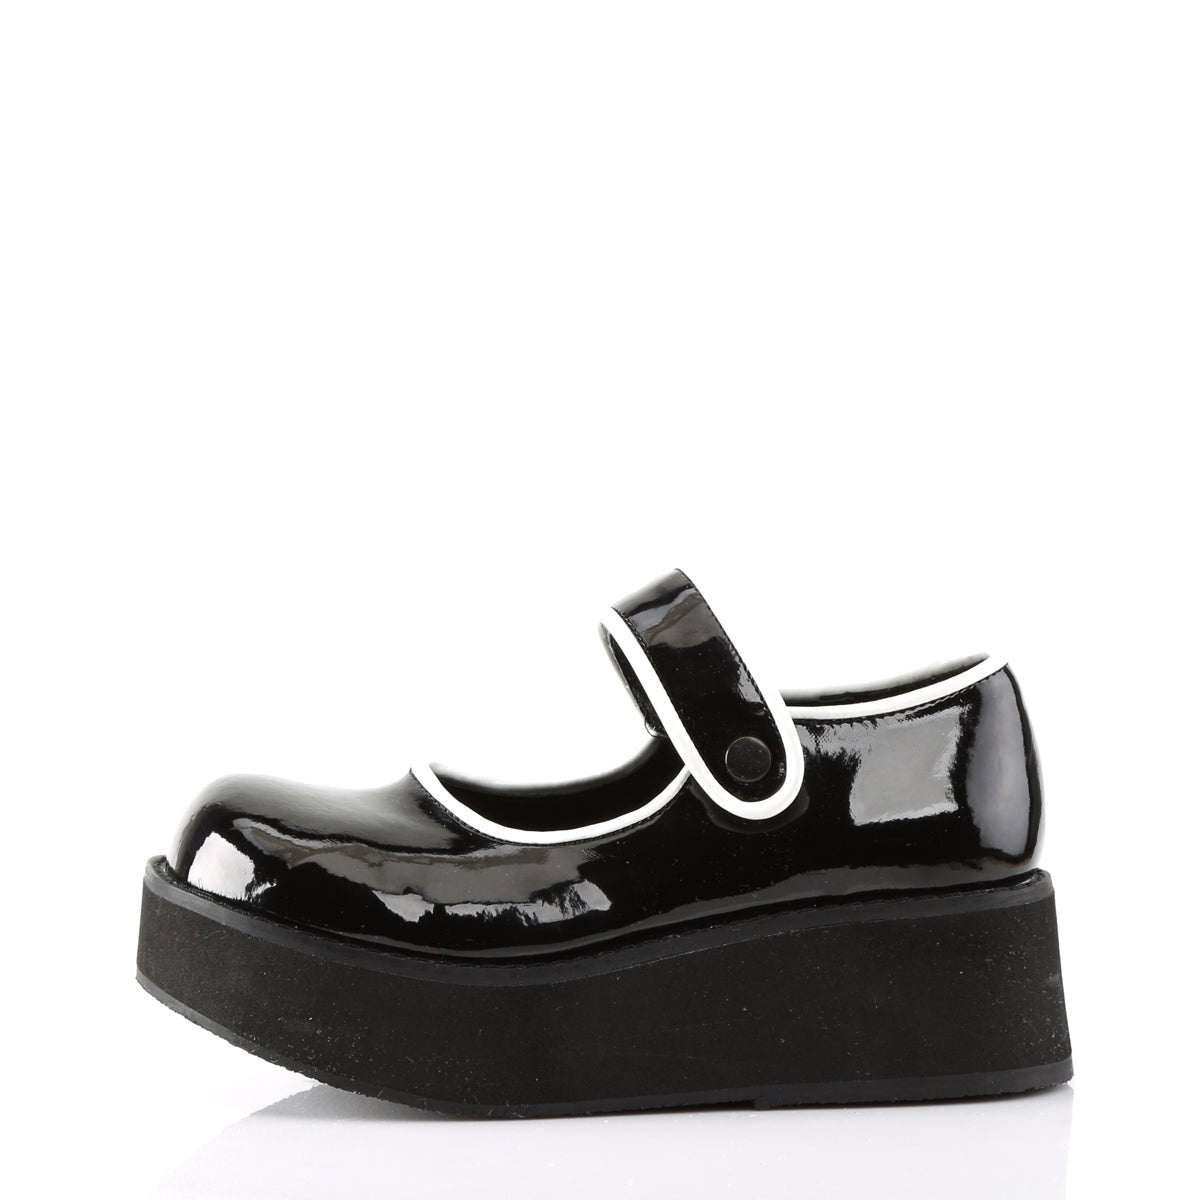 Too Fast | Demonia Sprite 01 | Black Patent Leather Women's Mary Janes